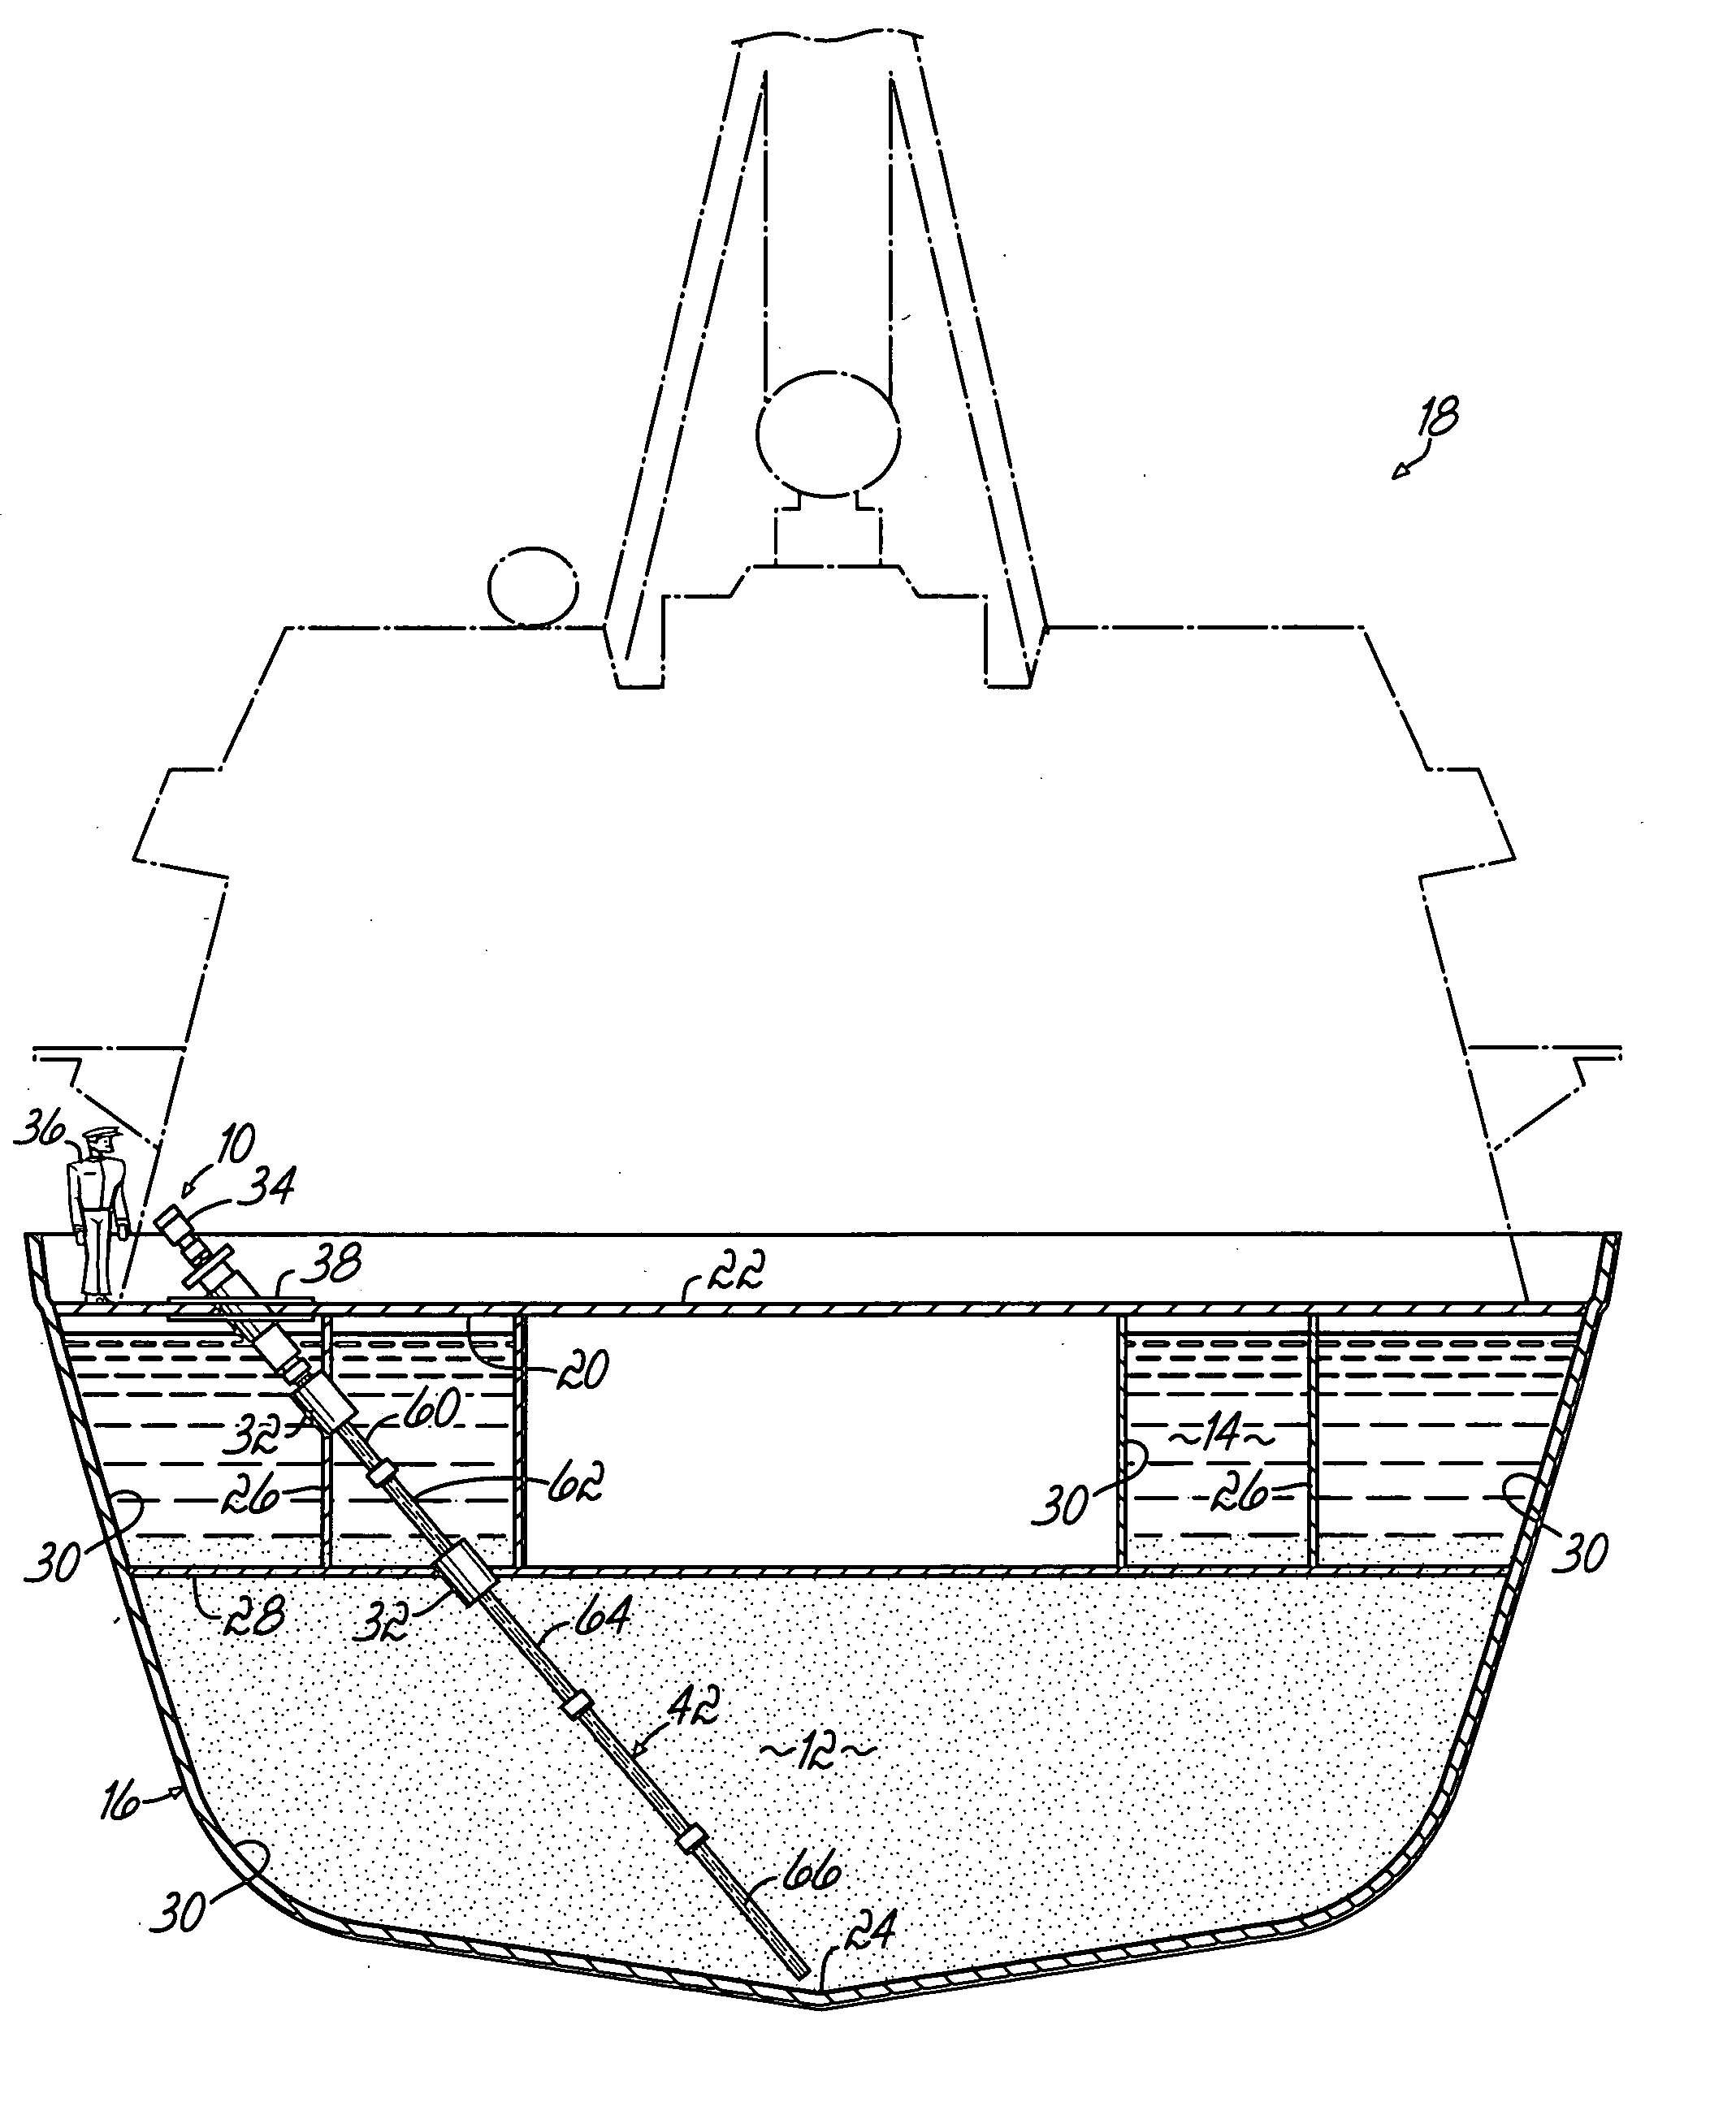 Apparatus for use in measuring fluid levels